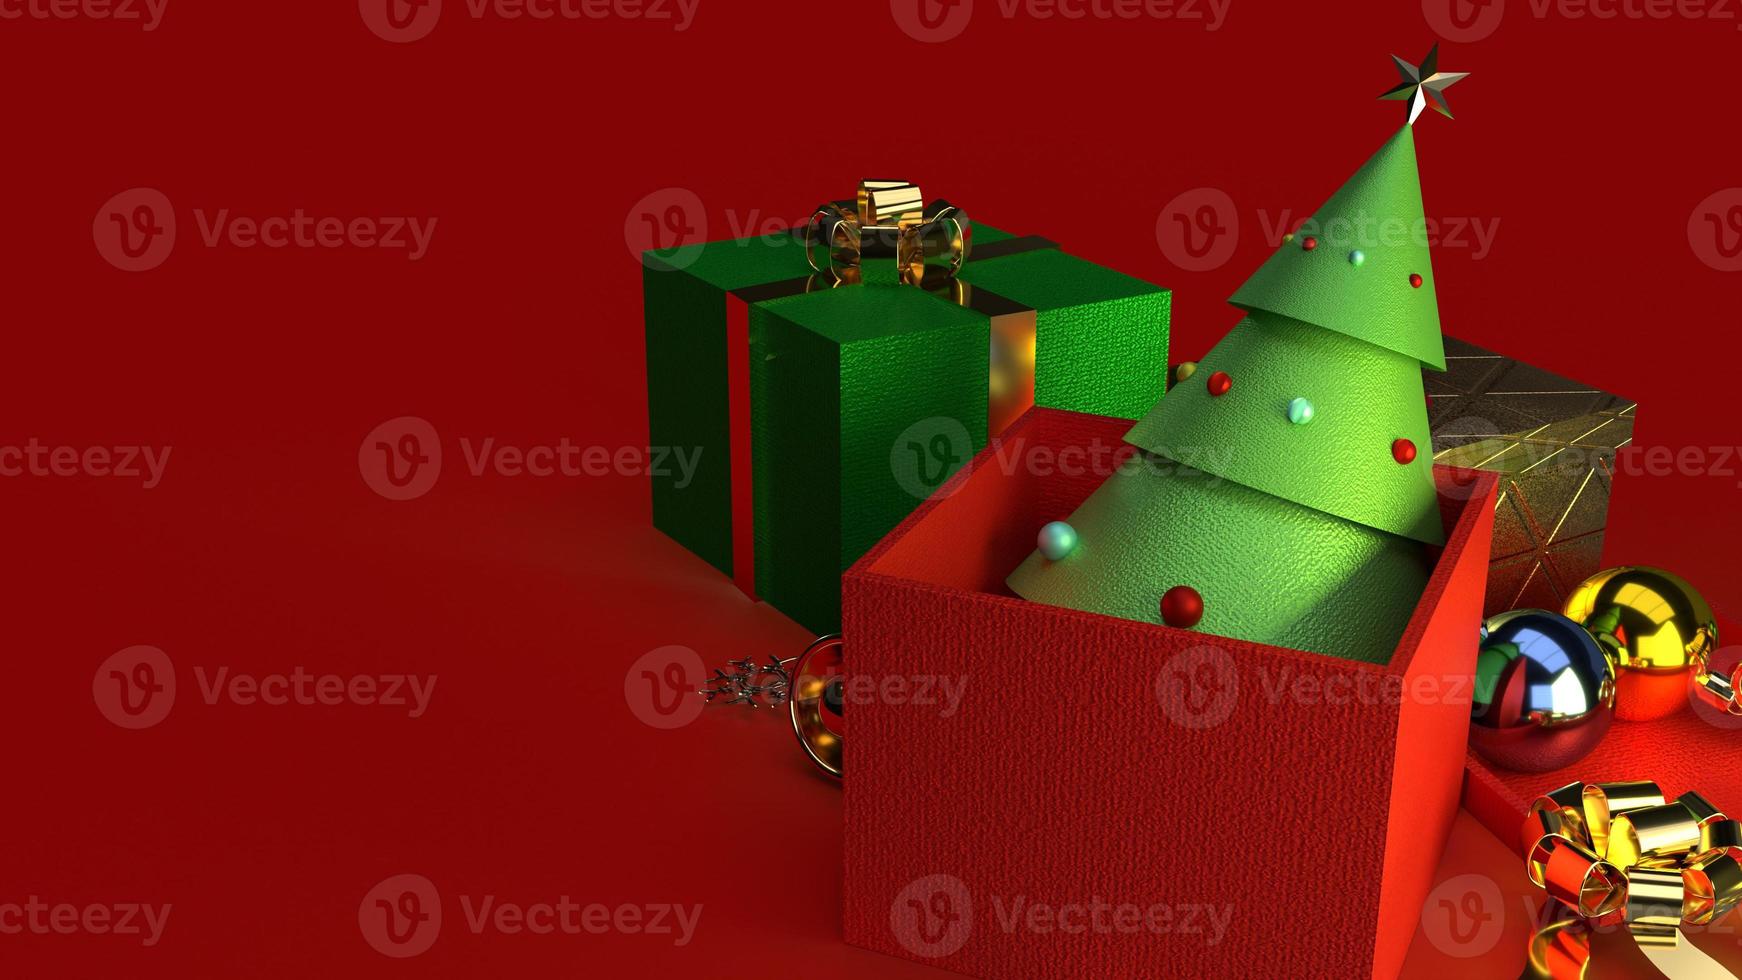 Christmas tree in gift box 3d rendering for Christmas content. photo